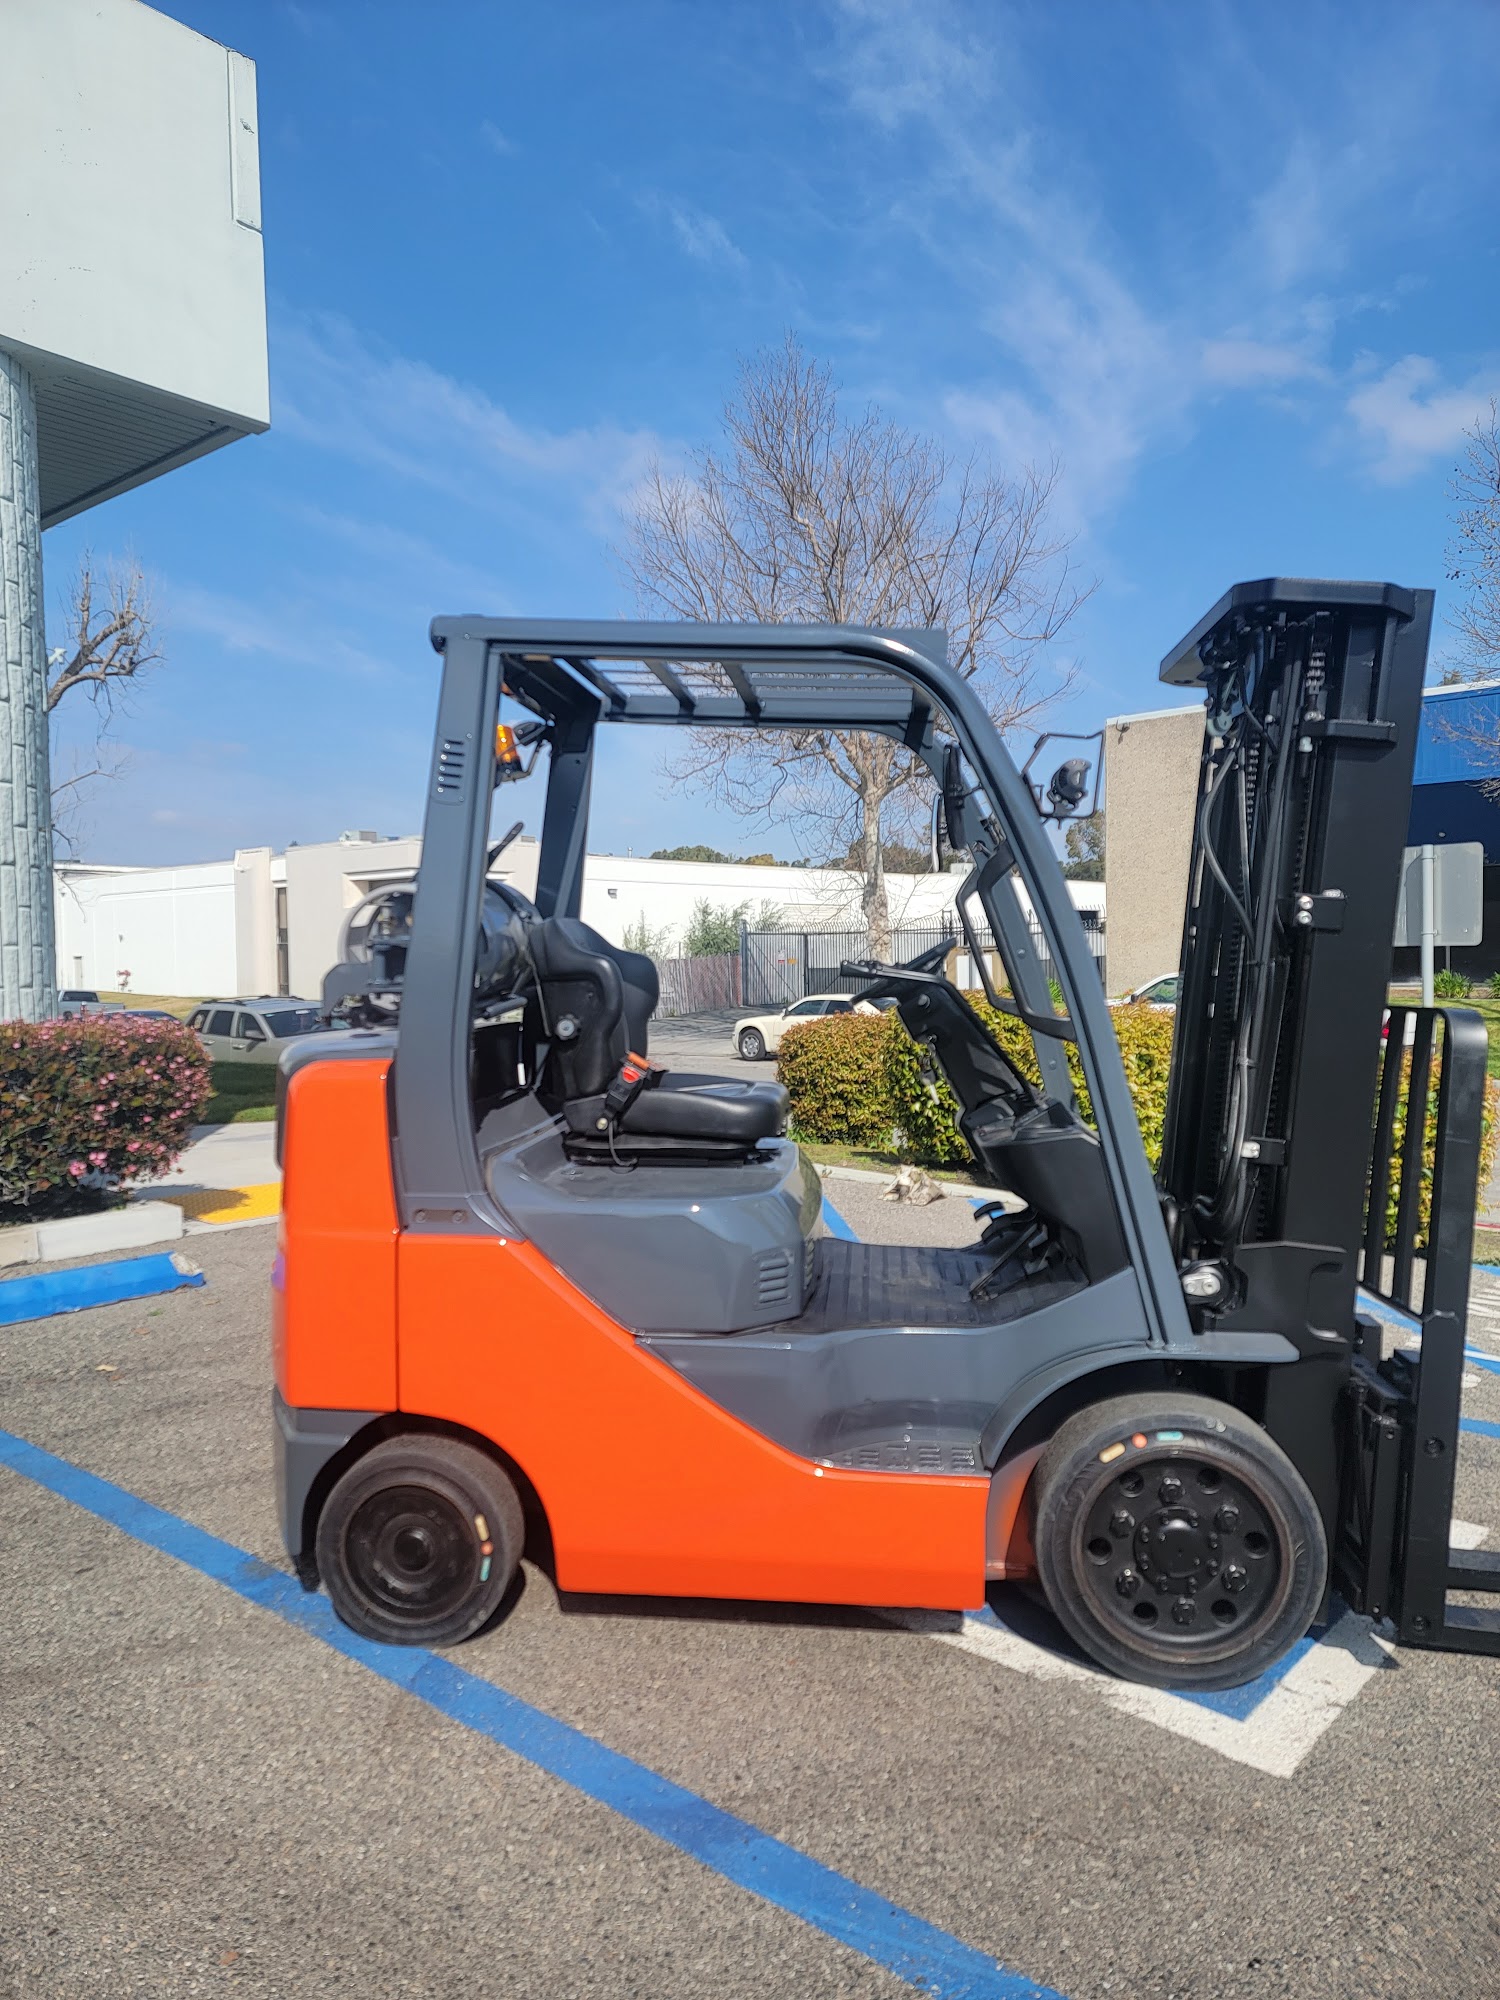 Beach City Lift Inc - Forklift Sales, Rental and Service